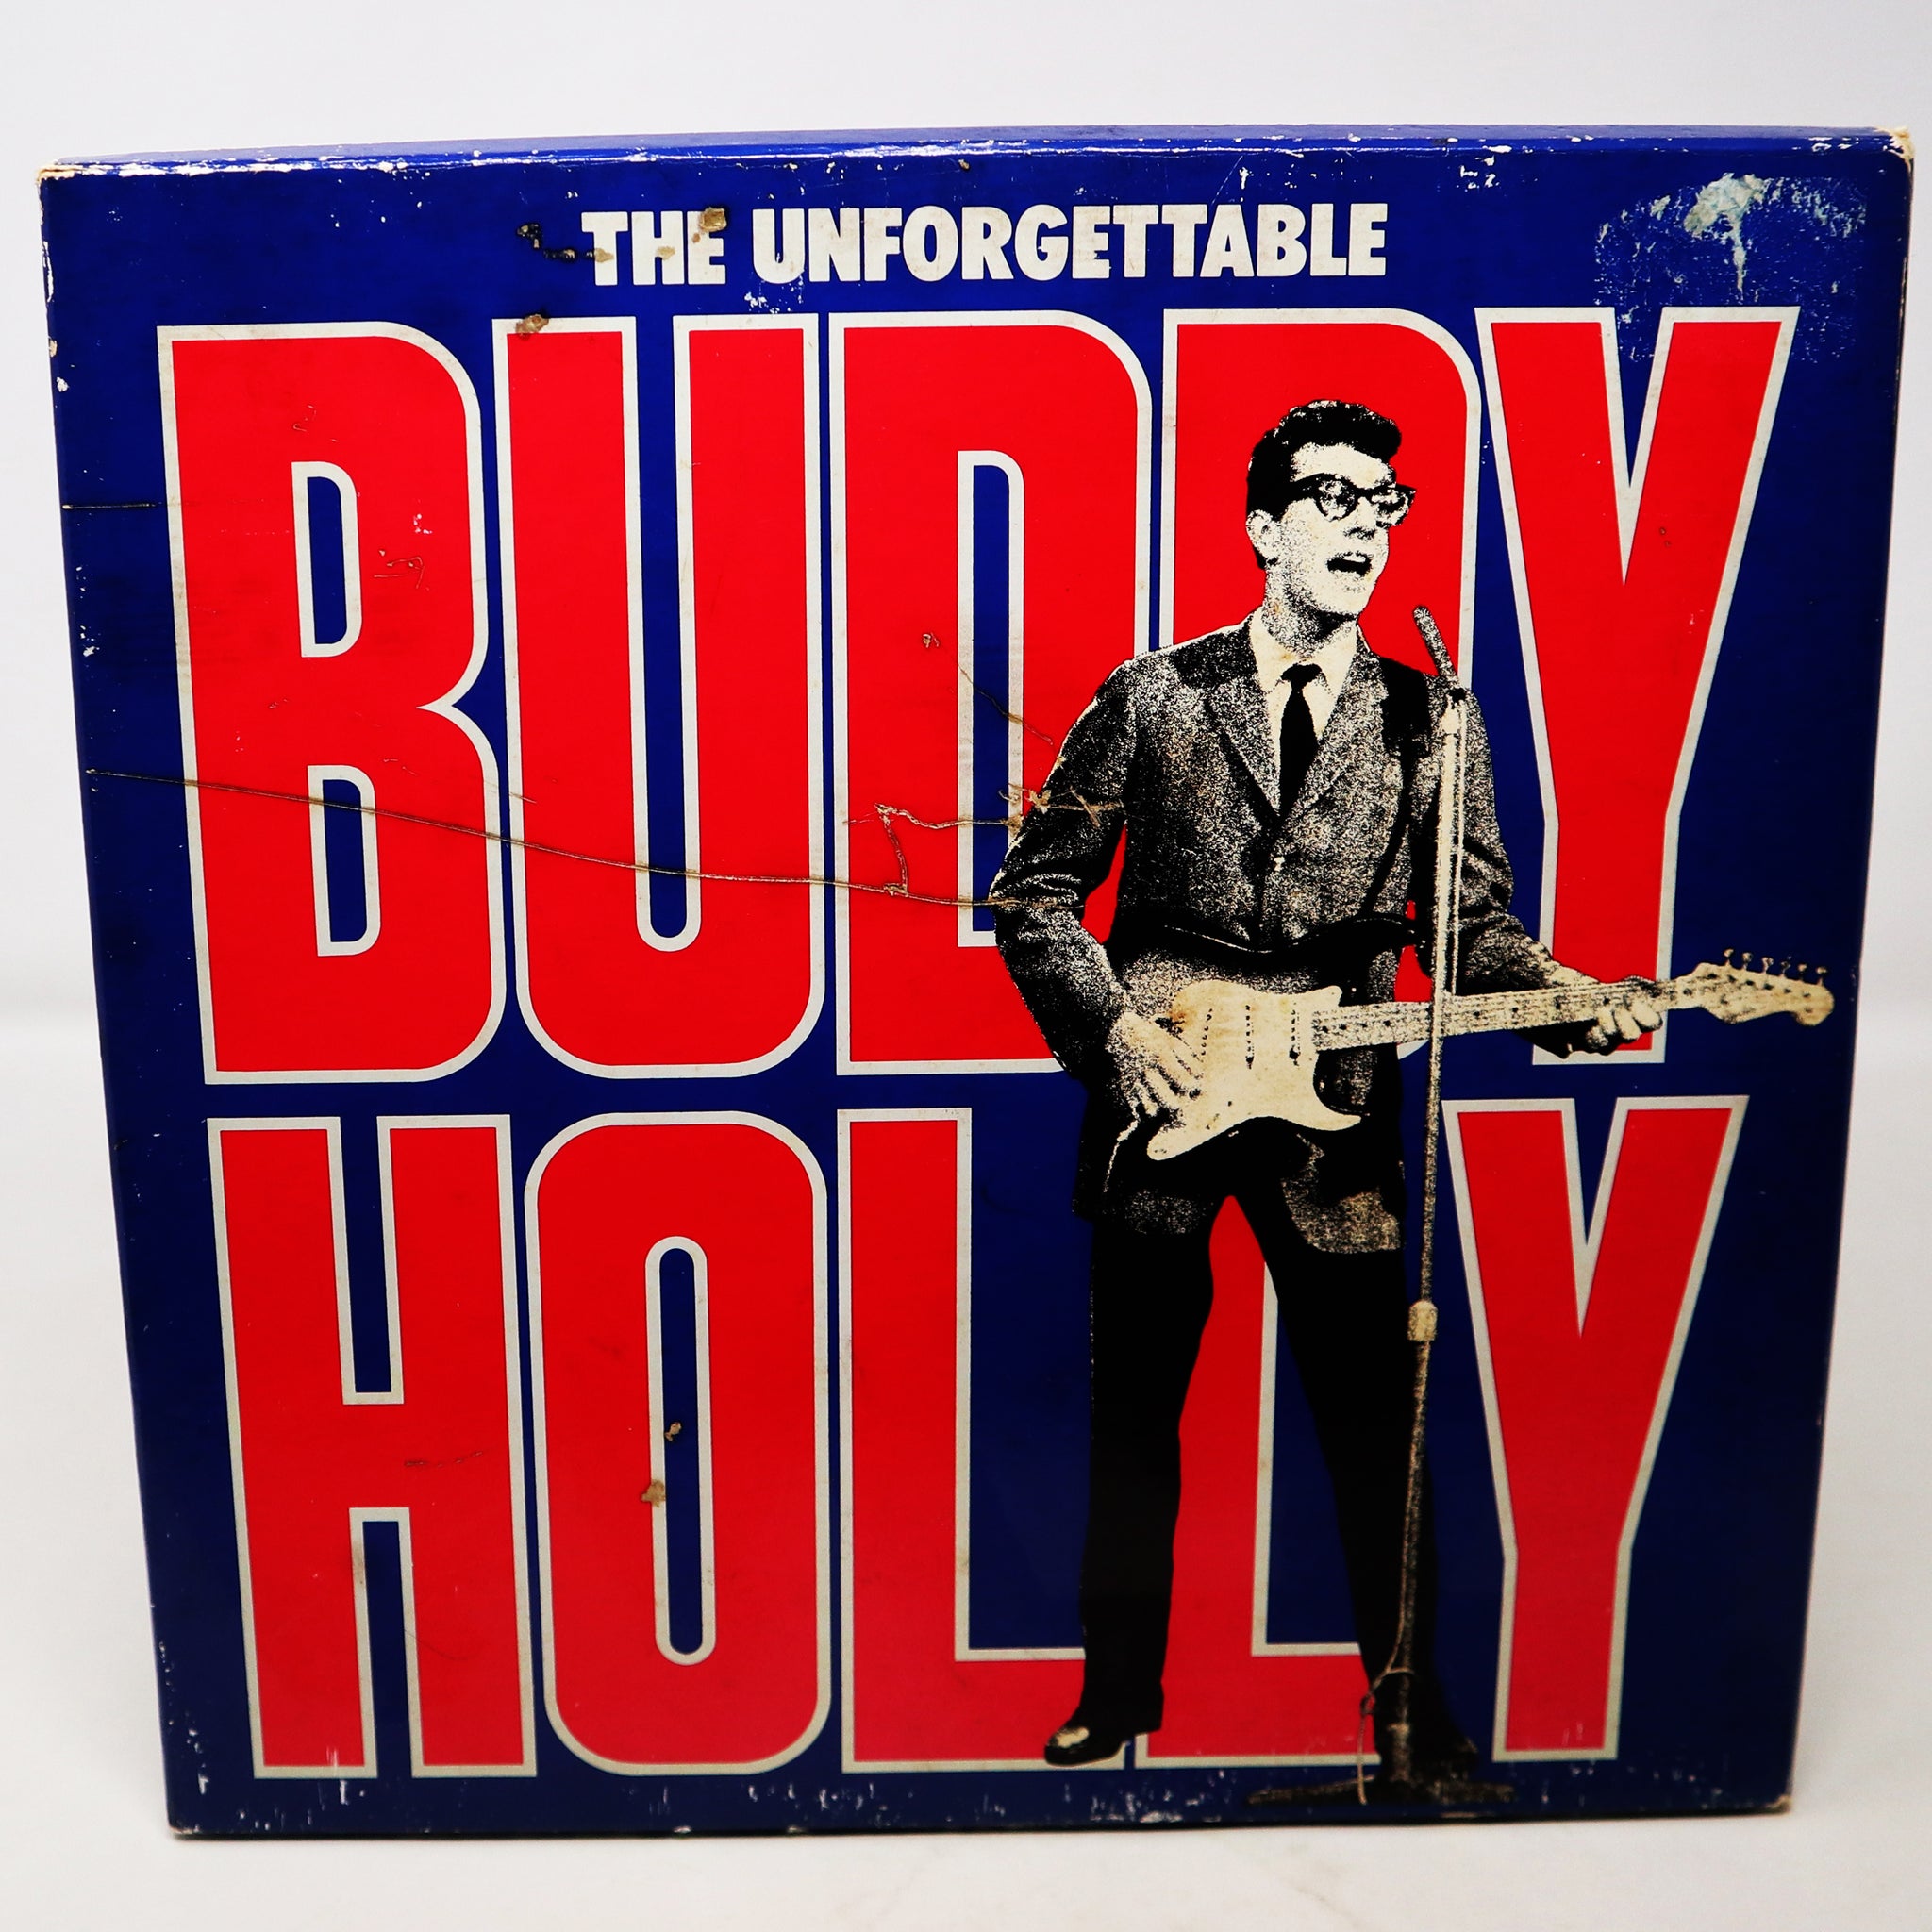 Vintage 1986 80s Reader's Digest Buddy Holly - The Unforgettable Buddy Holly 4 x LP Album Vinyl Record Compilation Limited Edition Boxset Boxed Rare